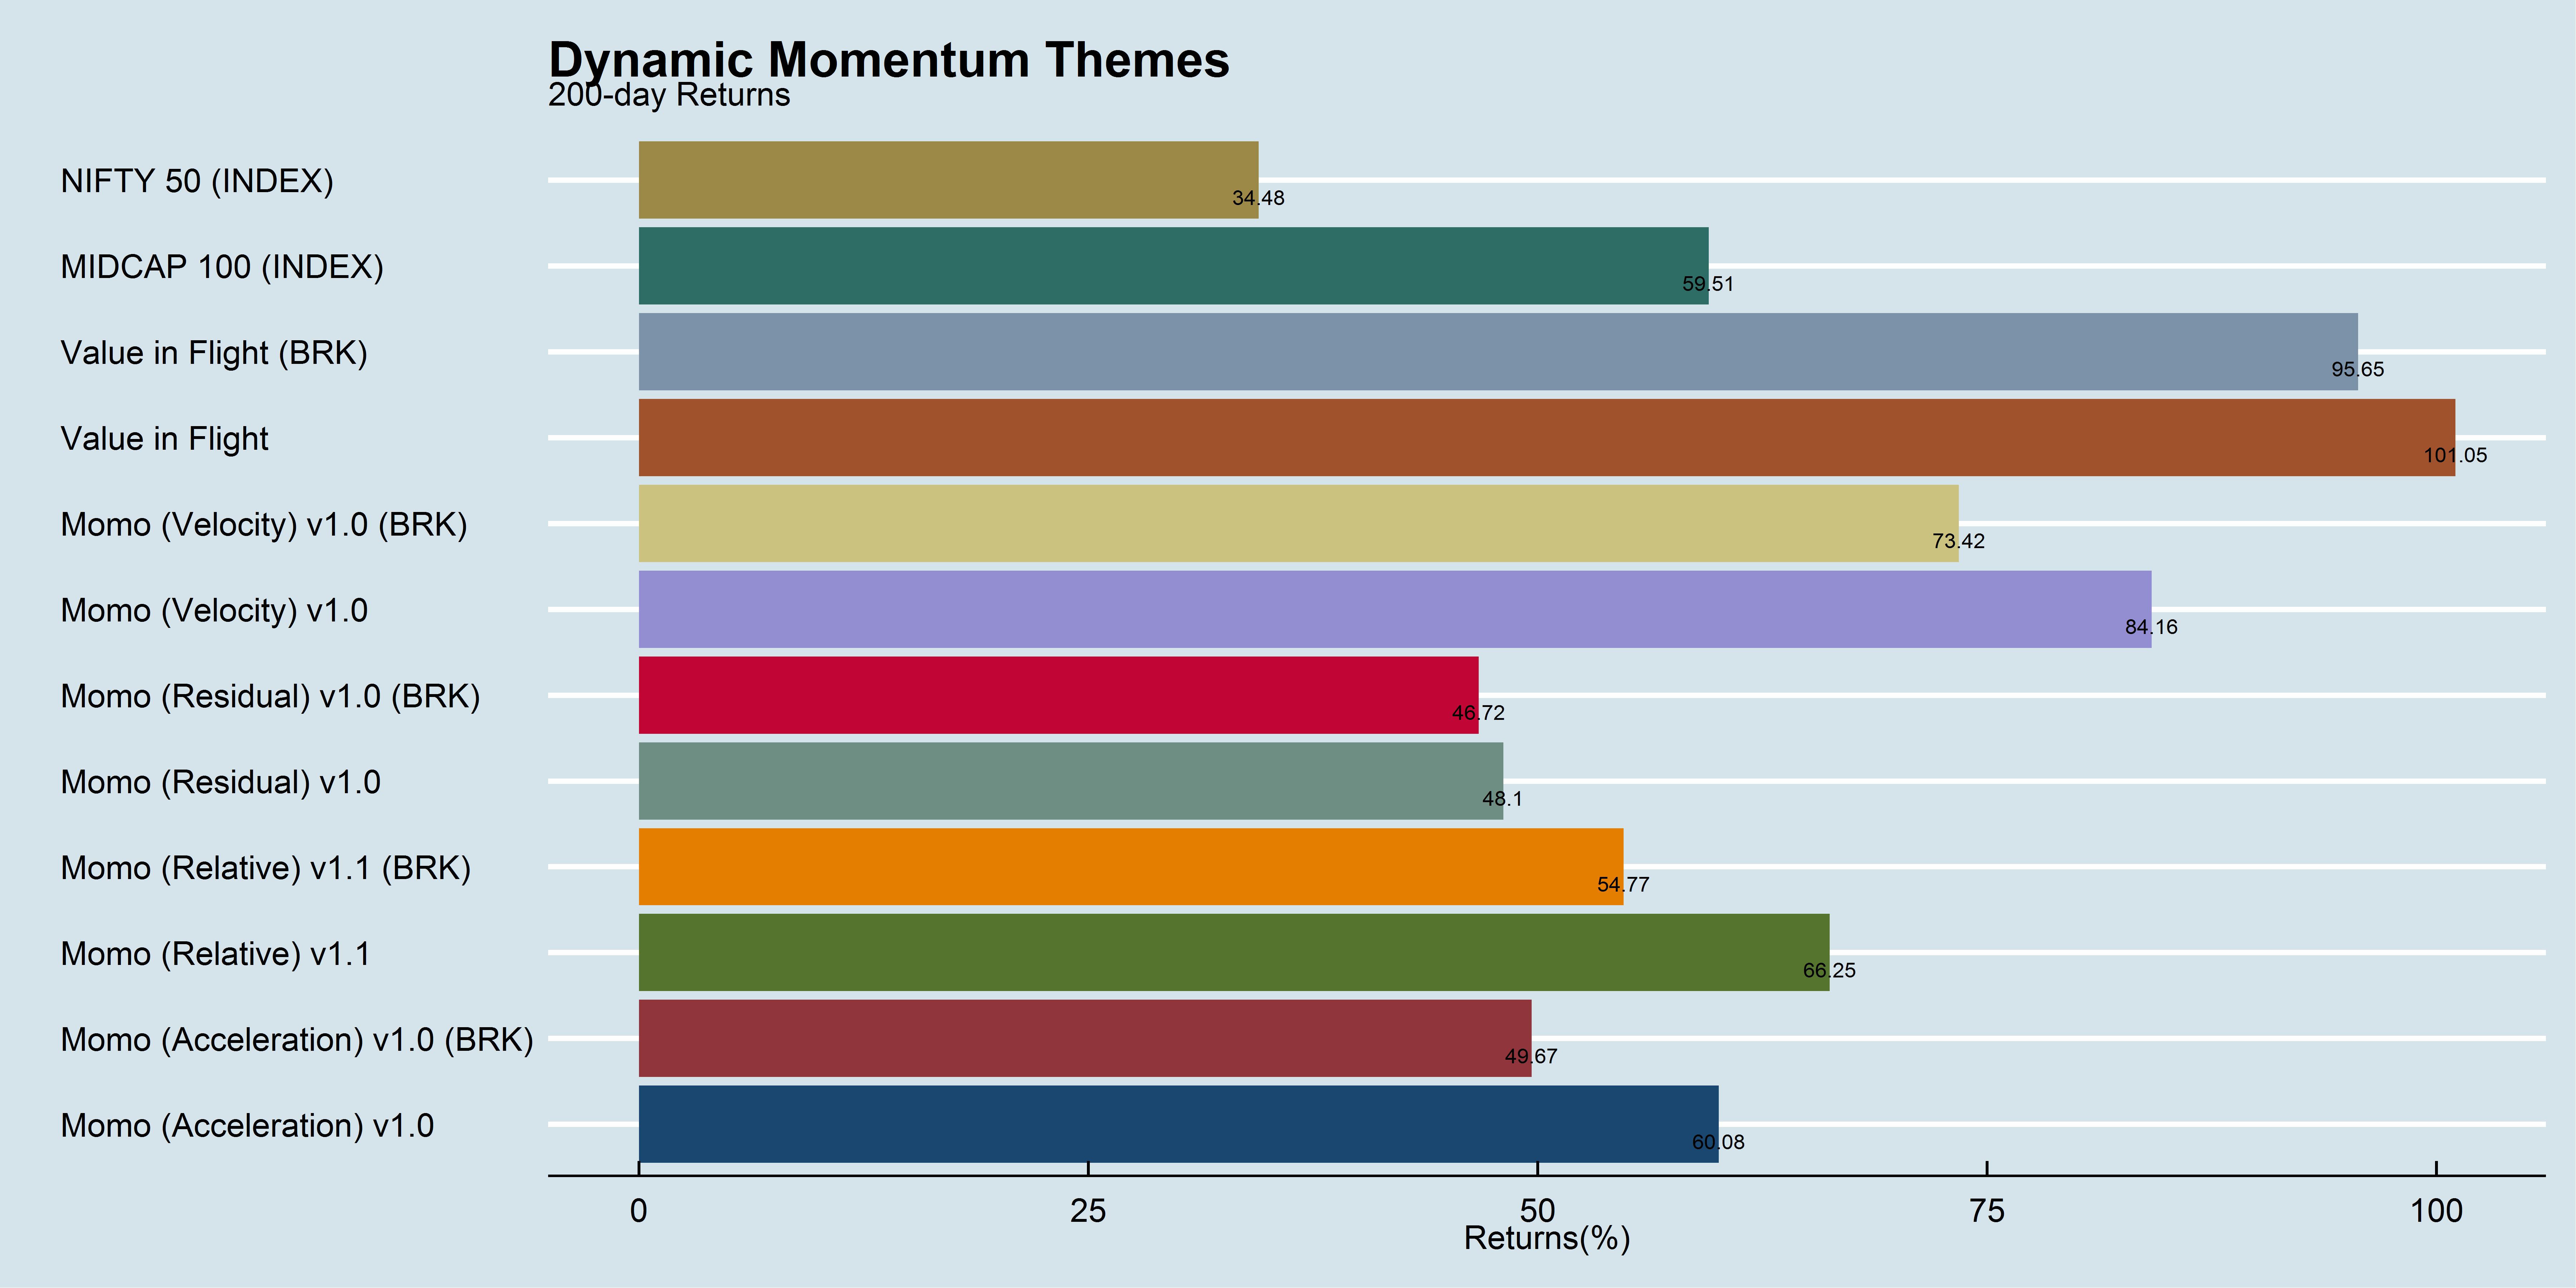 Dynamic Momentum Themes 200-day performance